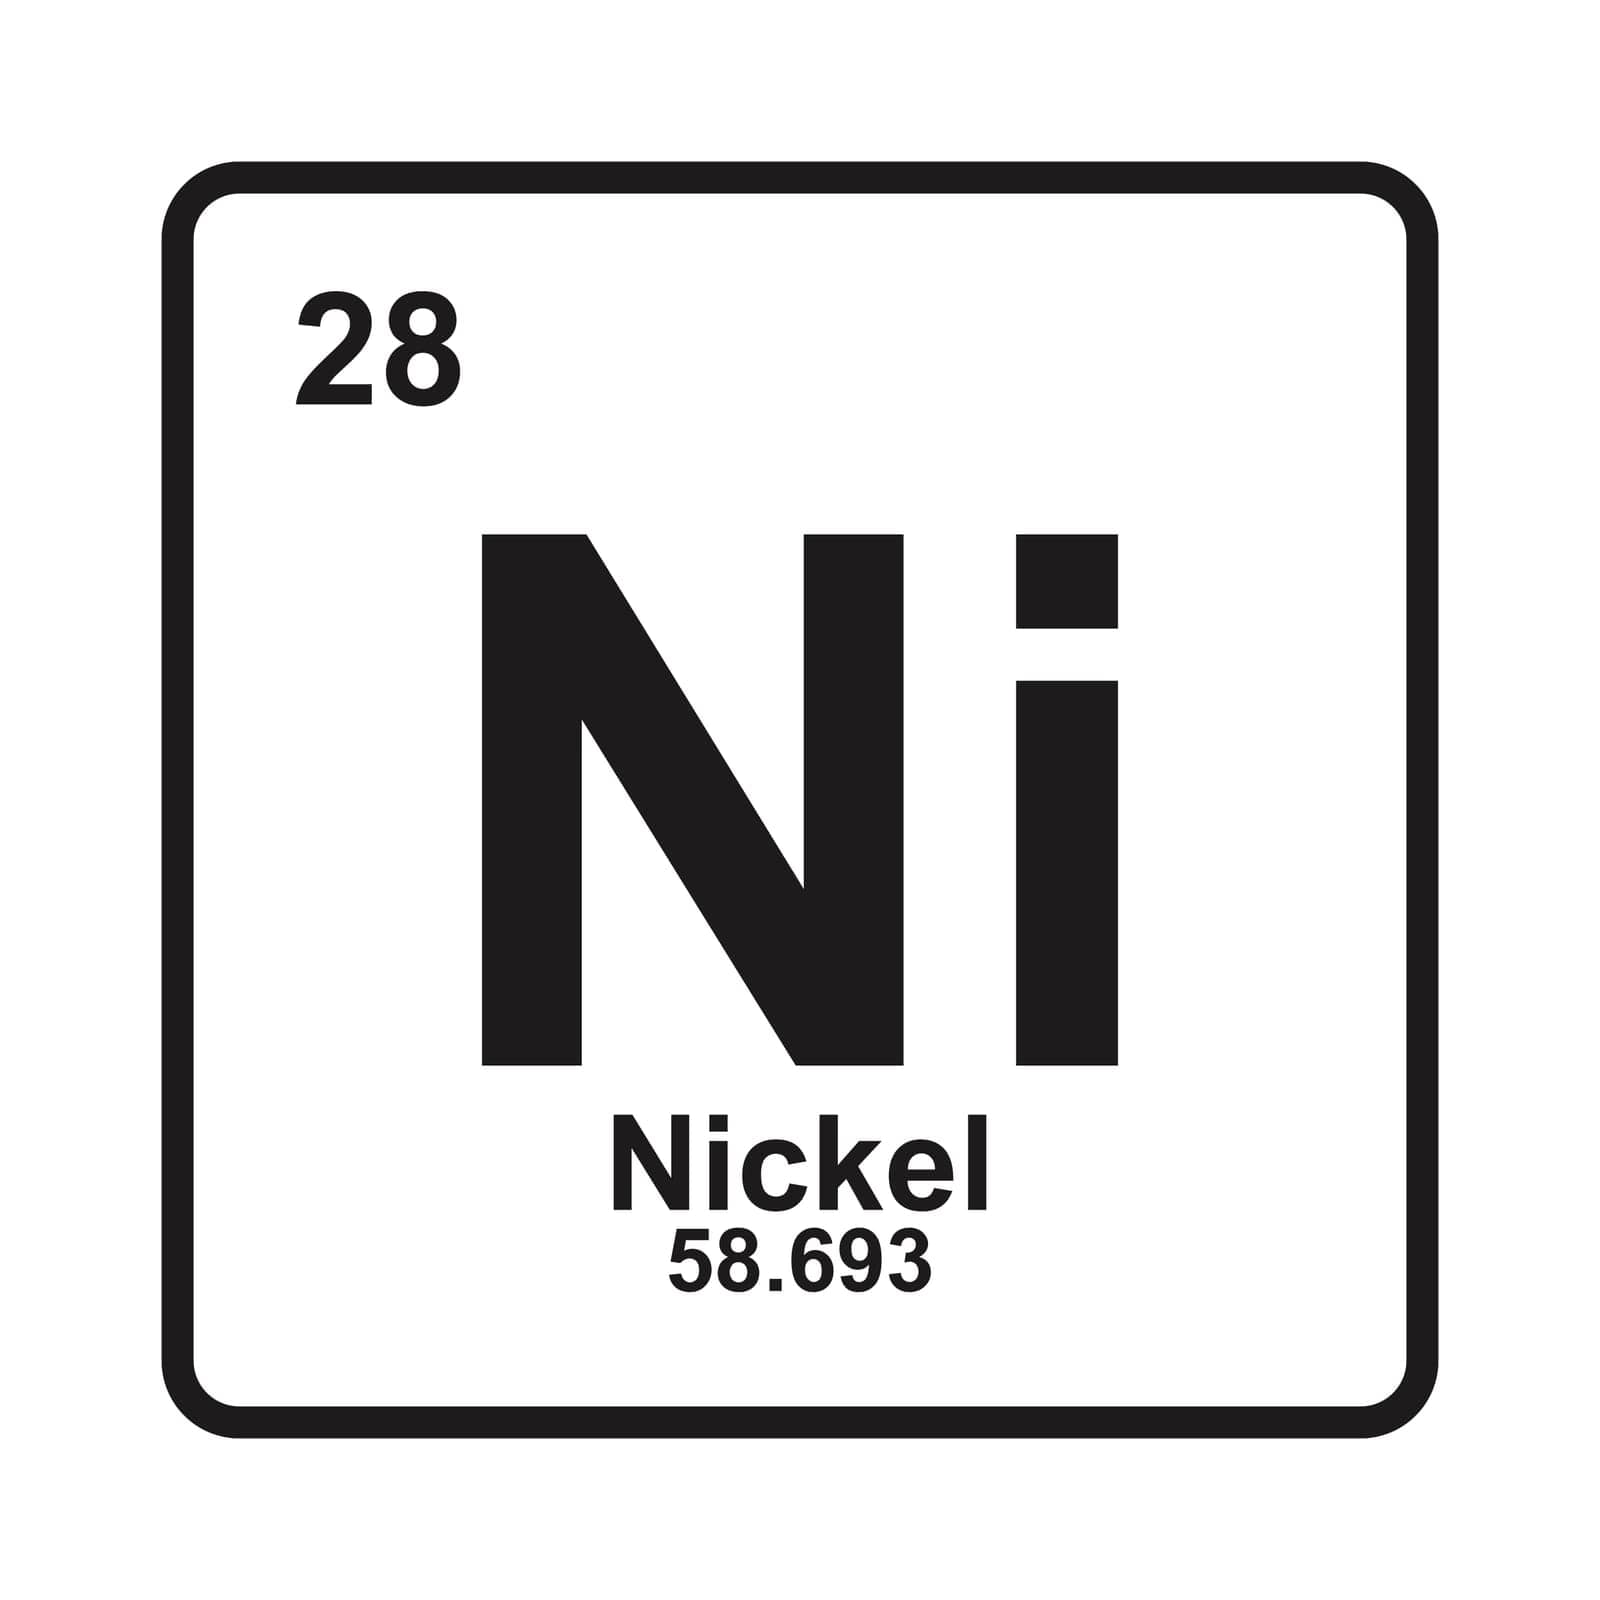 Nickel element icon by rnking